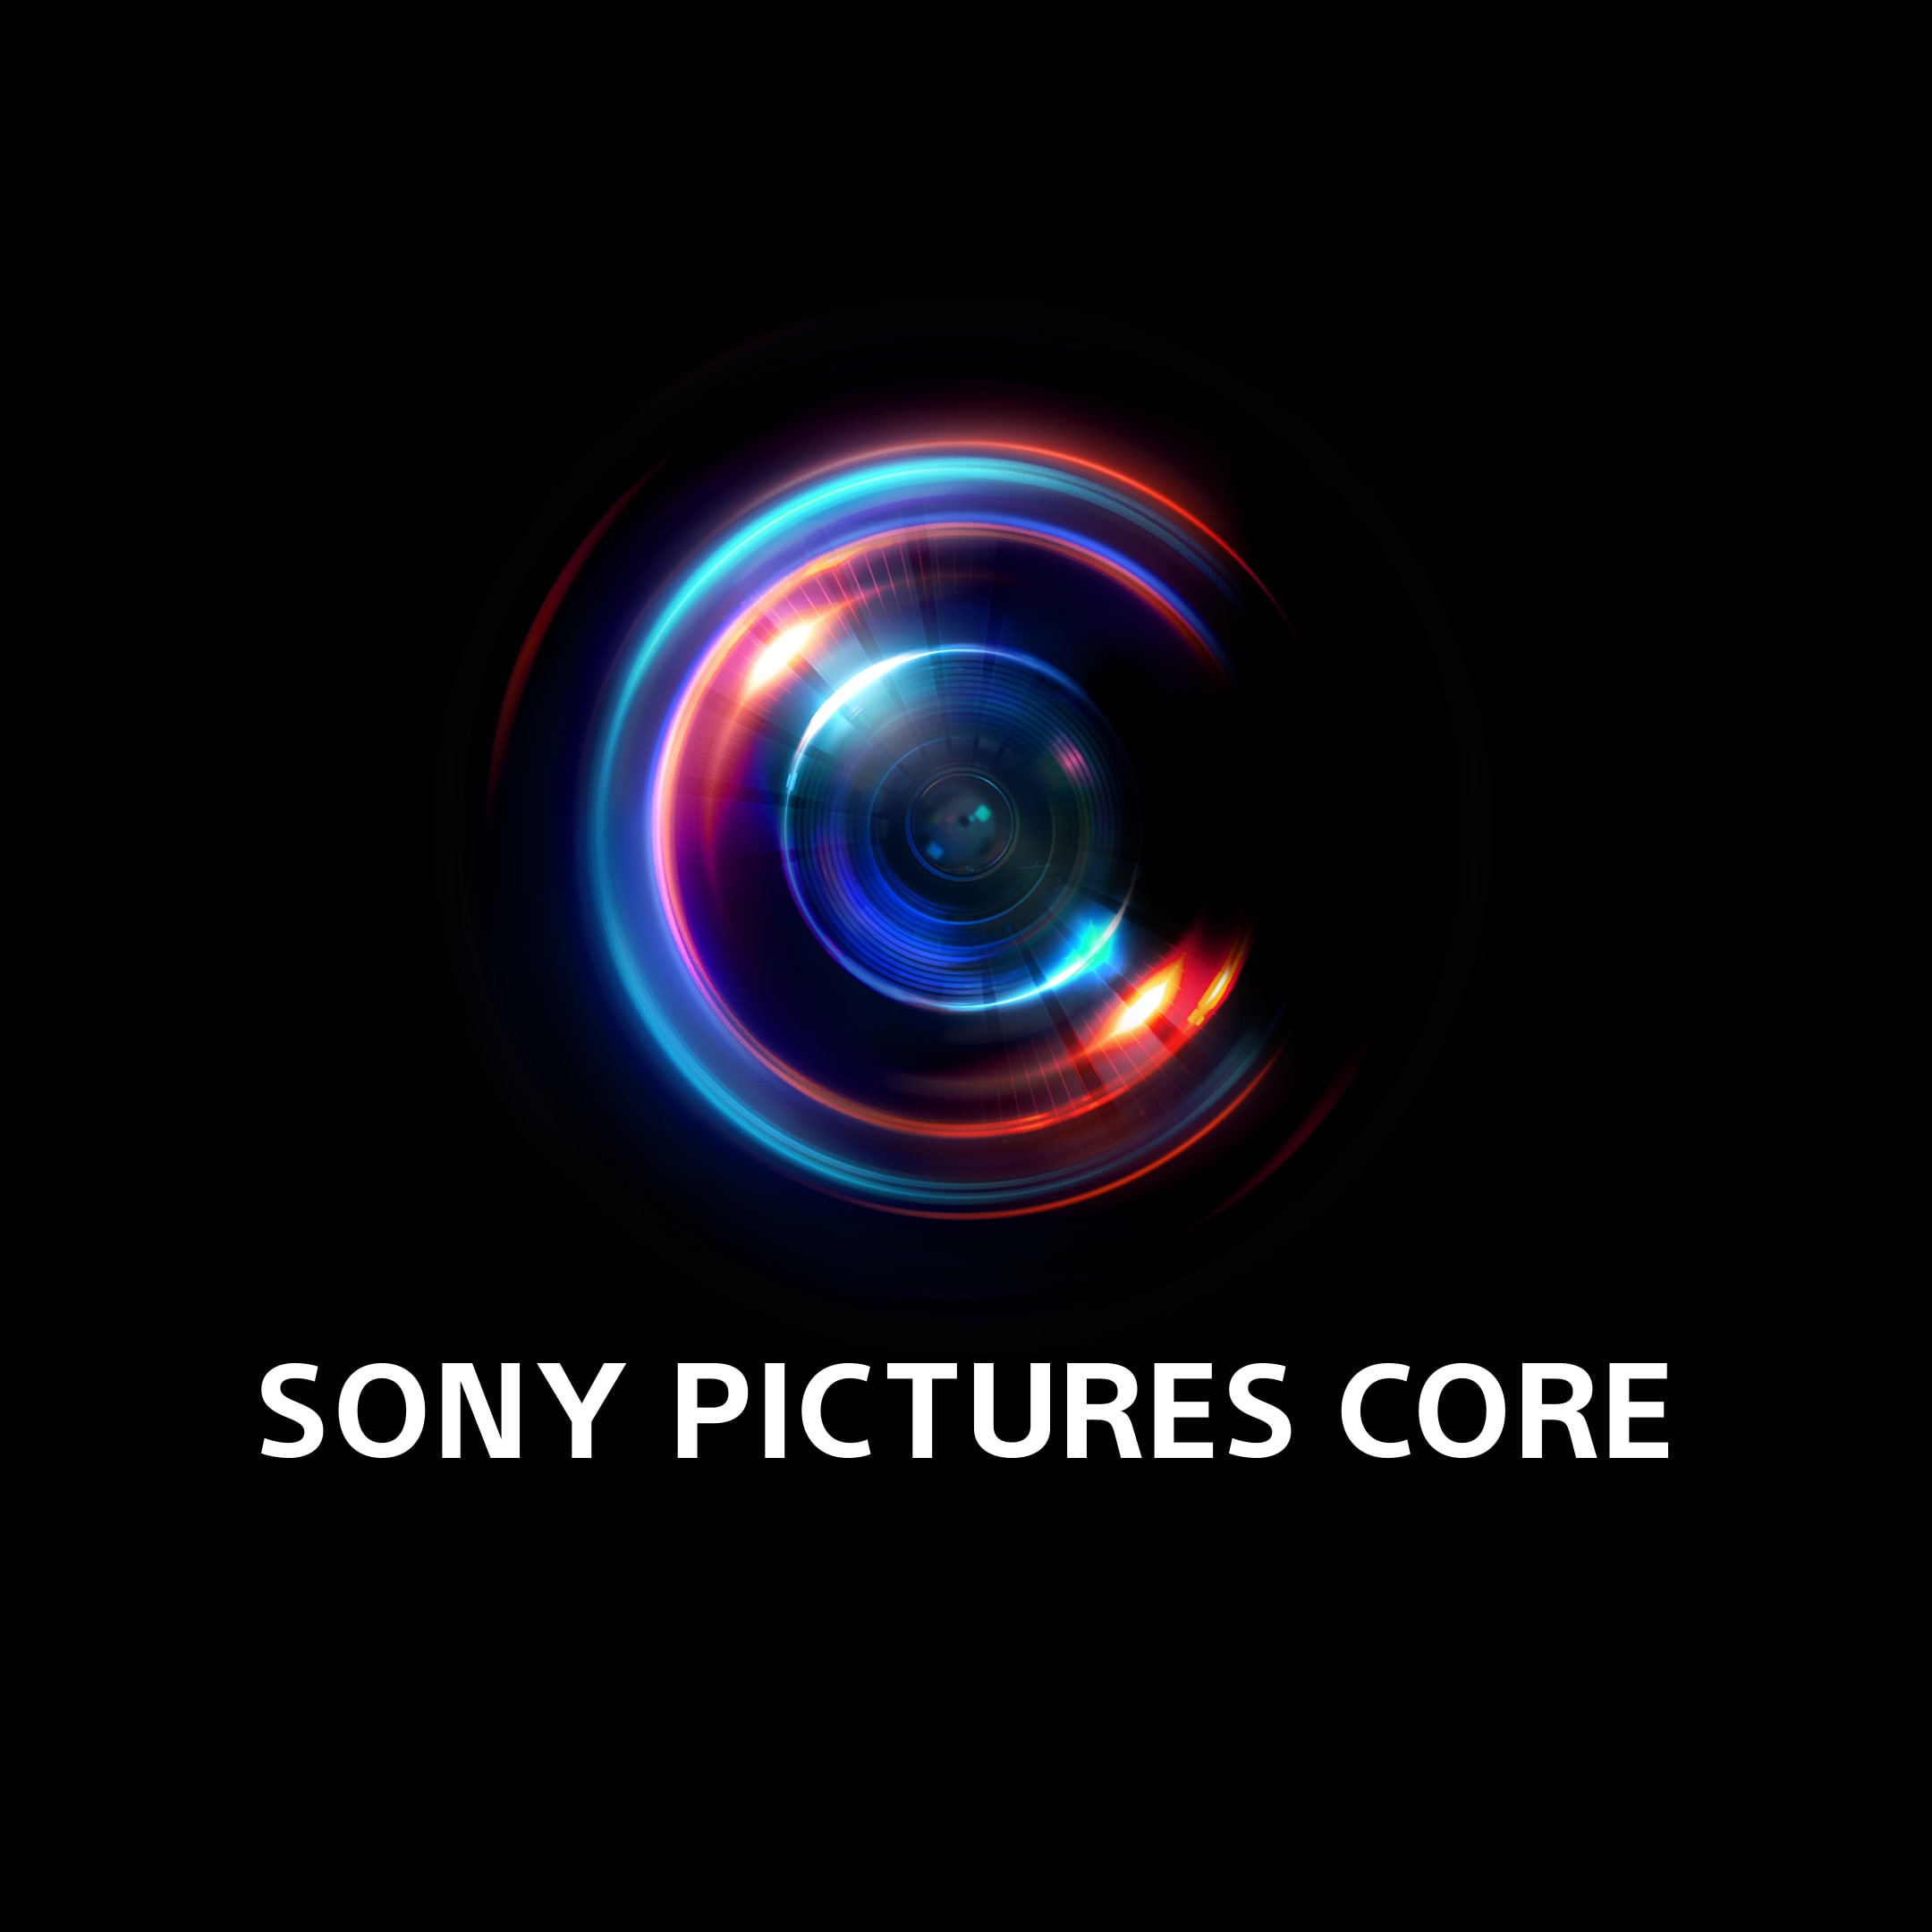 Sony Pictures Core  Stream, rent or buy Sony Pictures movies and